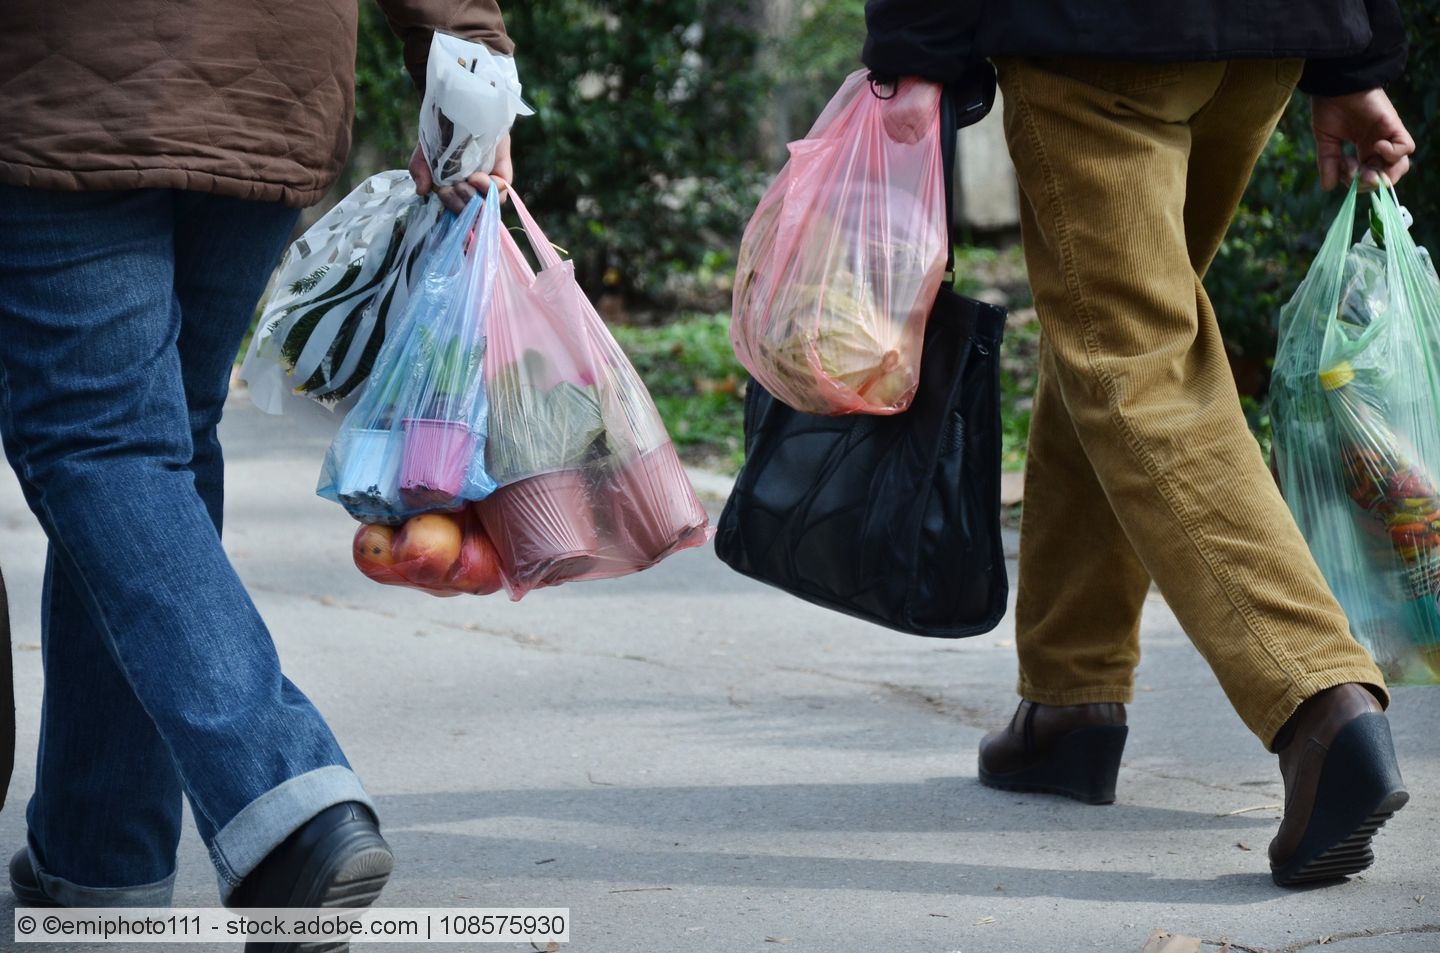 Austria to ban most plastic carrier bags